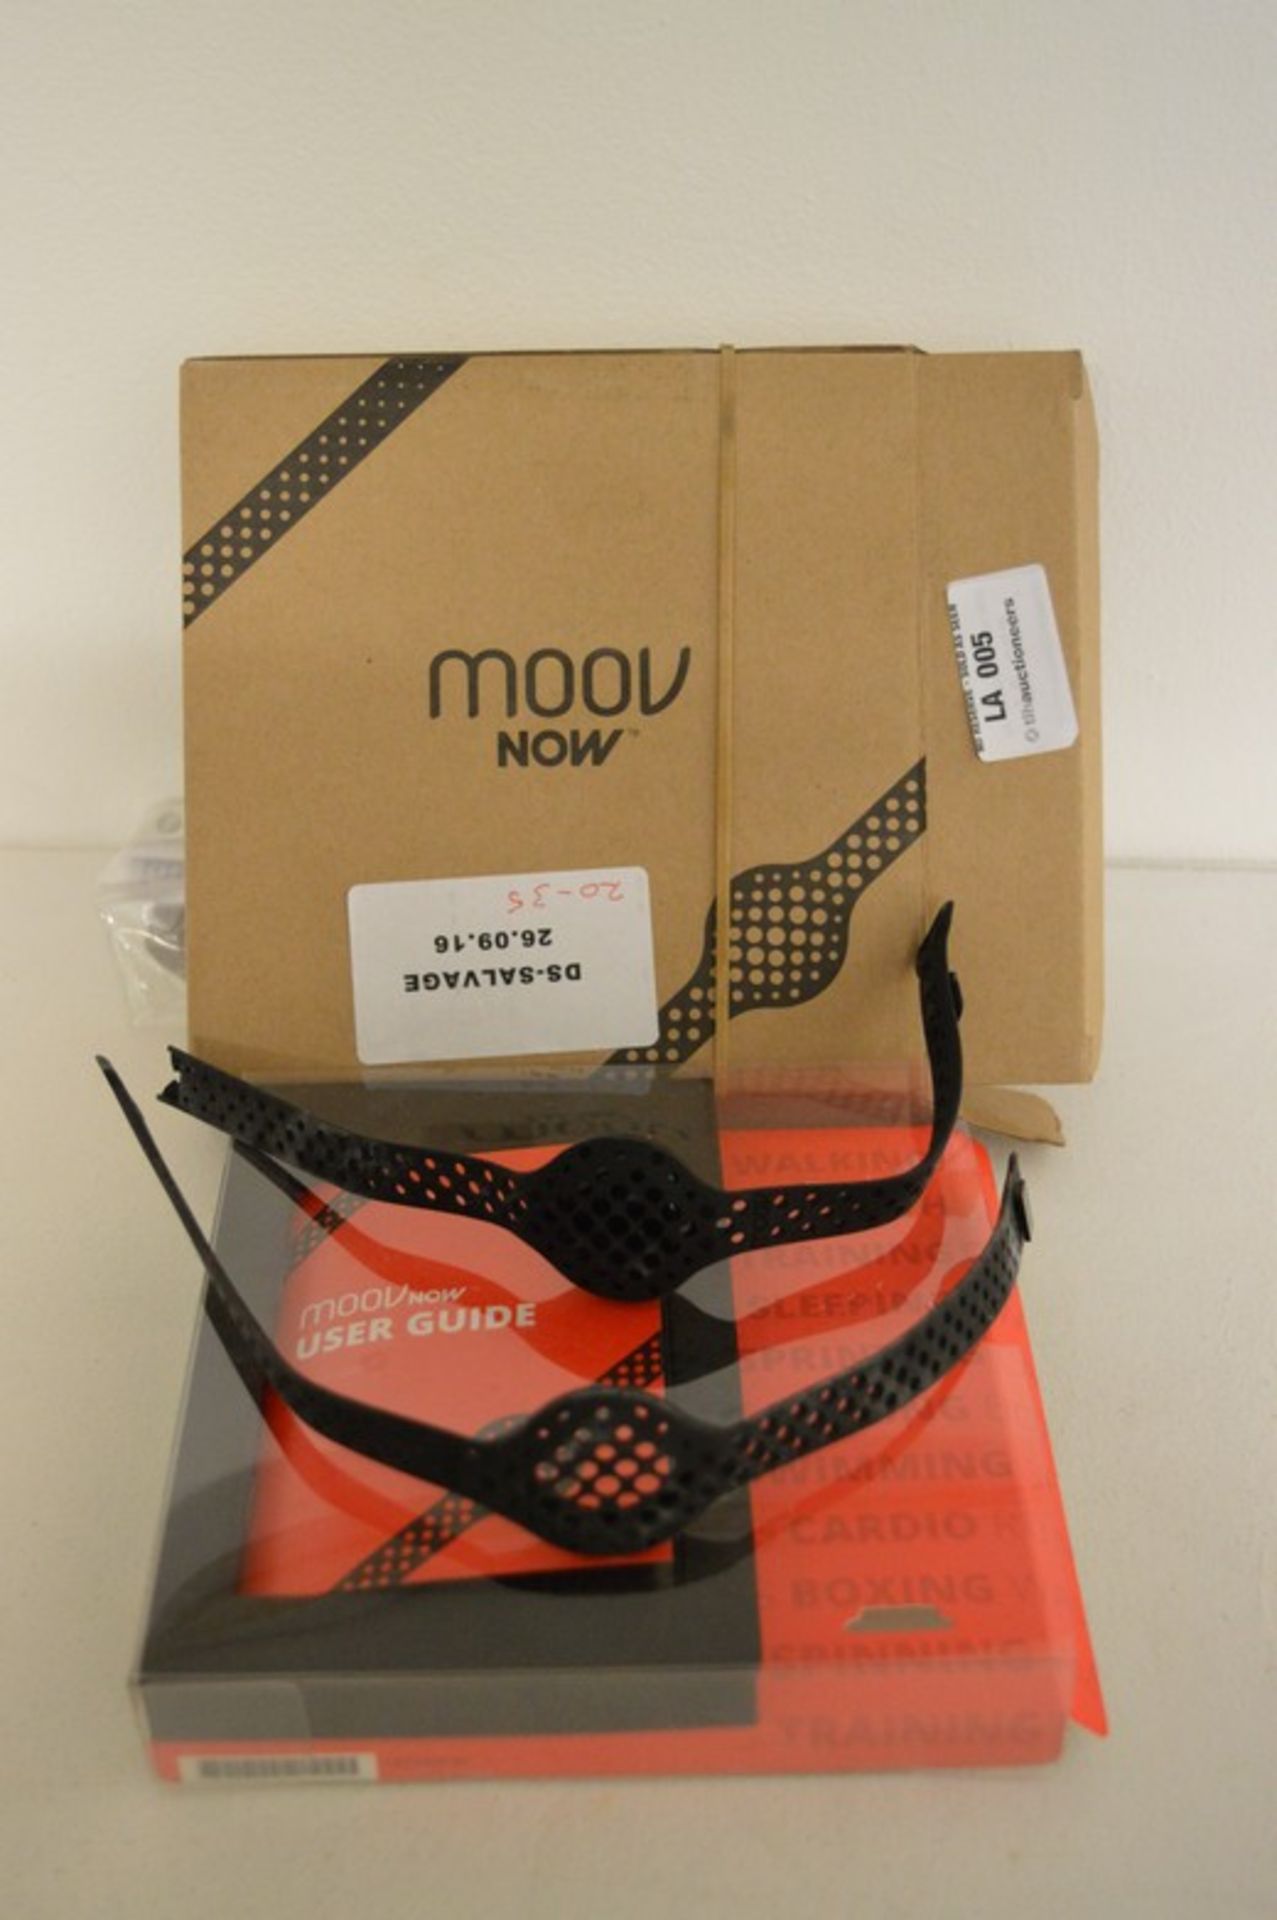 1 x BOXED MOOV NOW ACTIVITY WRIST BAND RRP £60 26.09.16 *PLEASE NOTE THAT THE BID PRICE IS